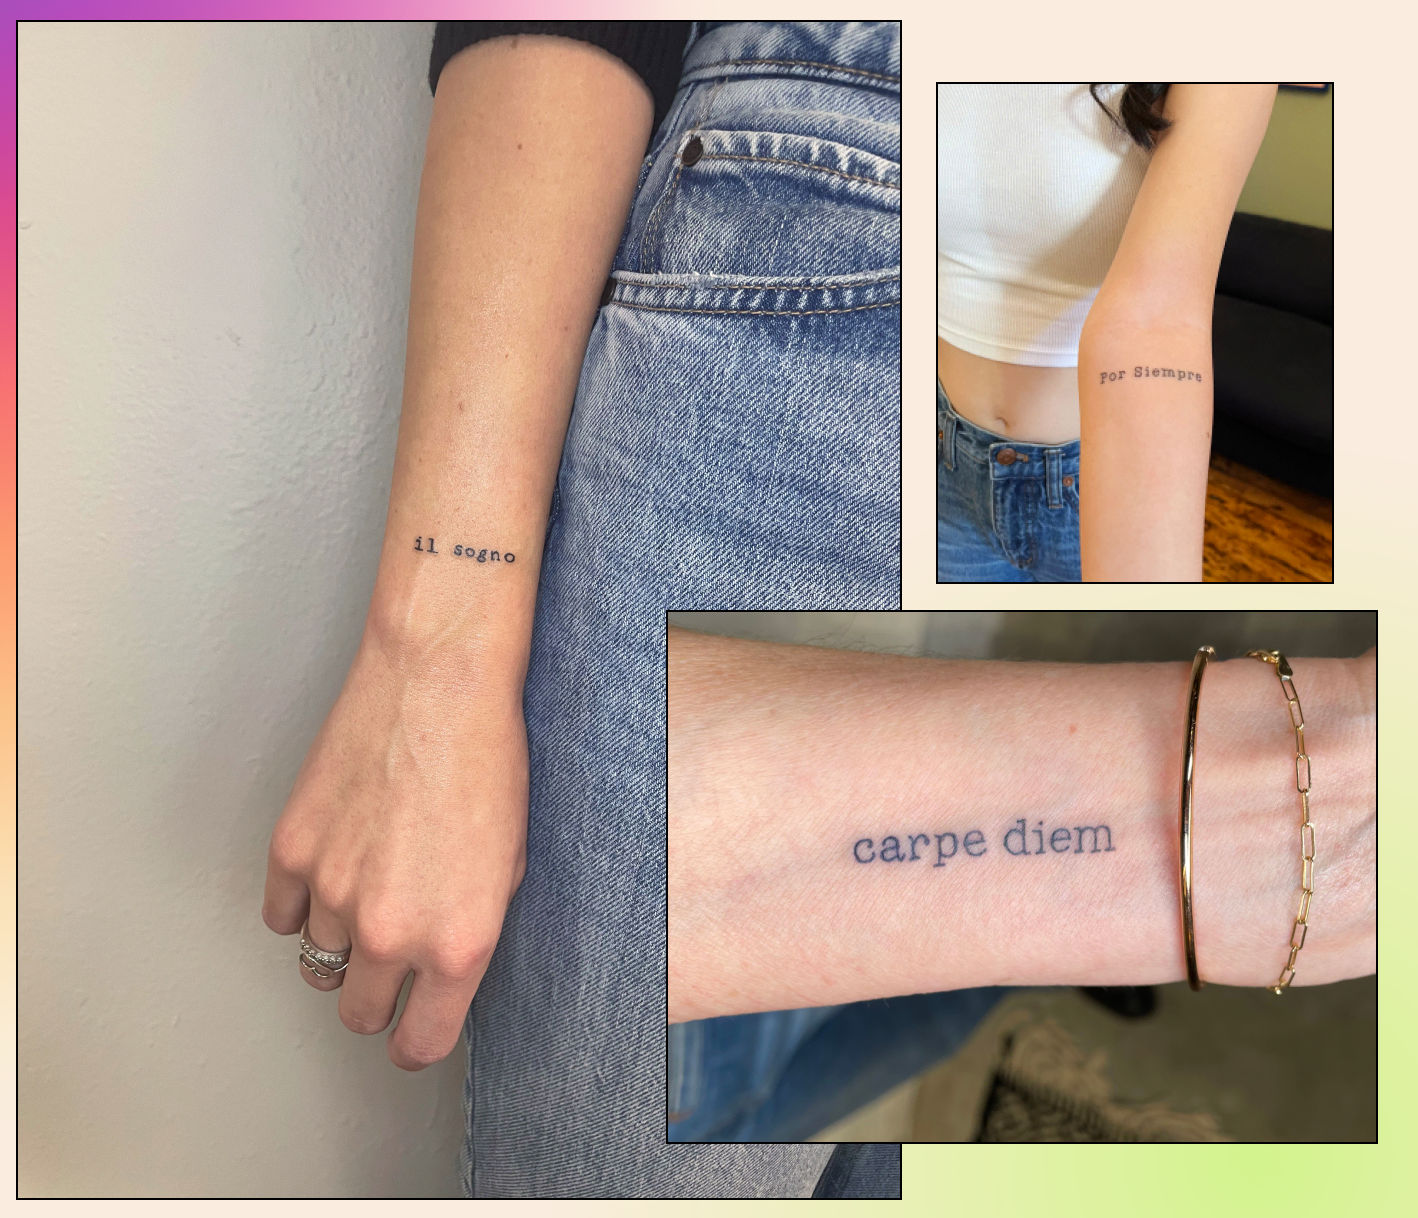 Buy Carpe Diem, Armband Tattoo, Tattoo for Women, Seize the Day, Arrow  Tattoo, Tattoo Design From Art Instantly Online in India - Etsy